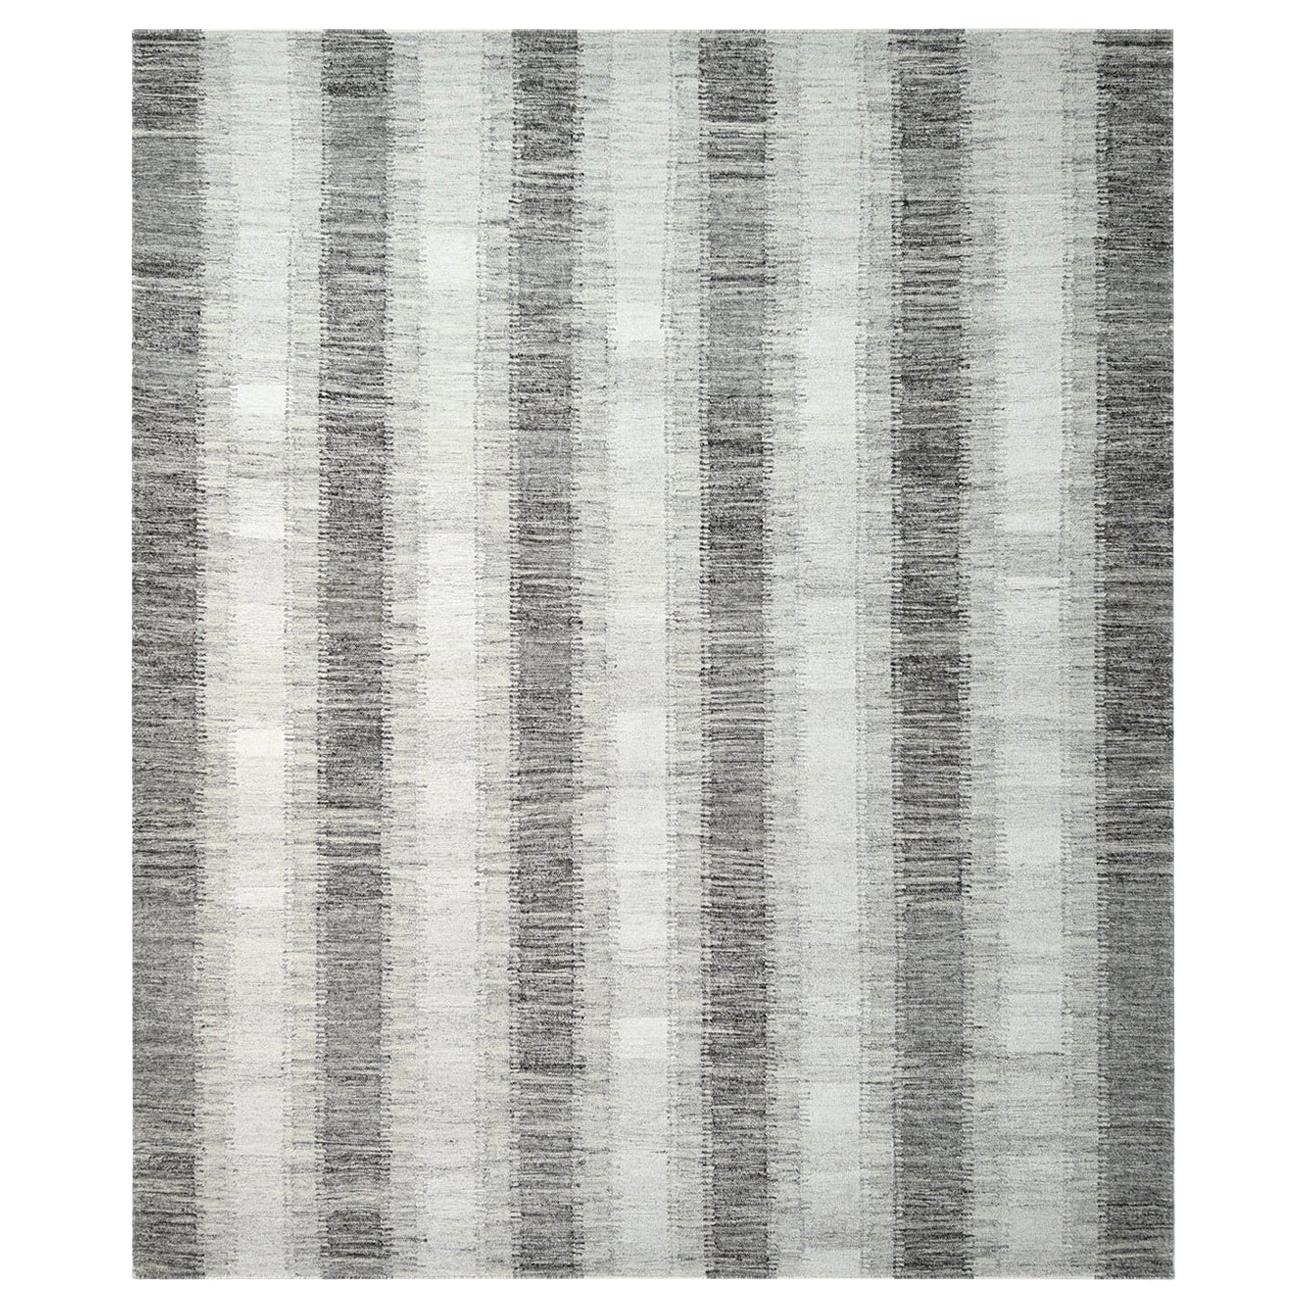 Indian Made Hand Woven Contemporary Flatweave Area Rug